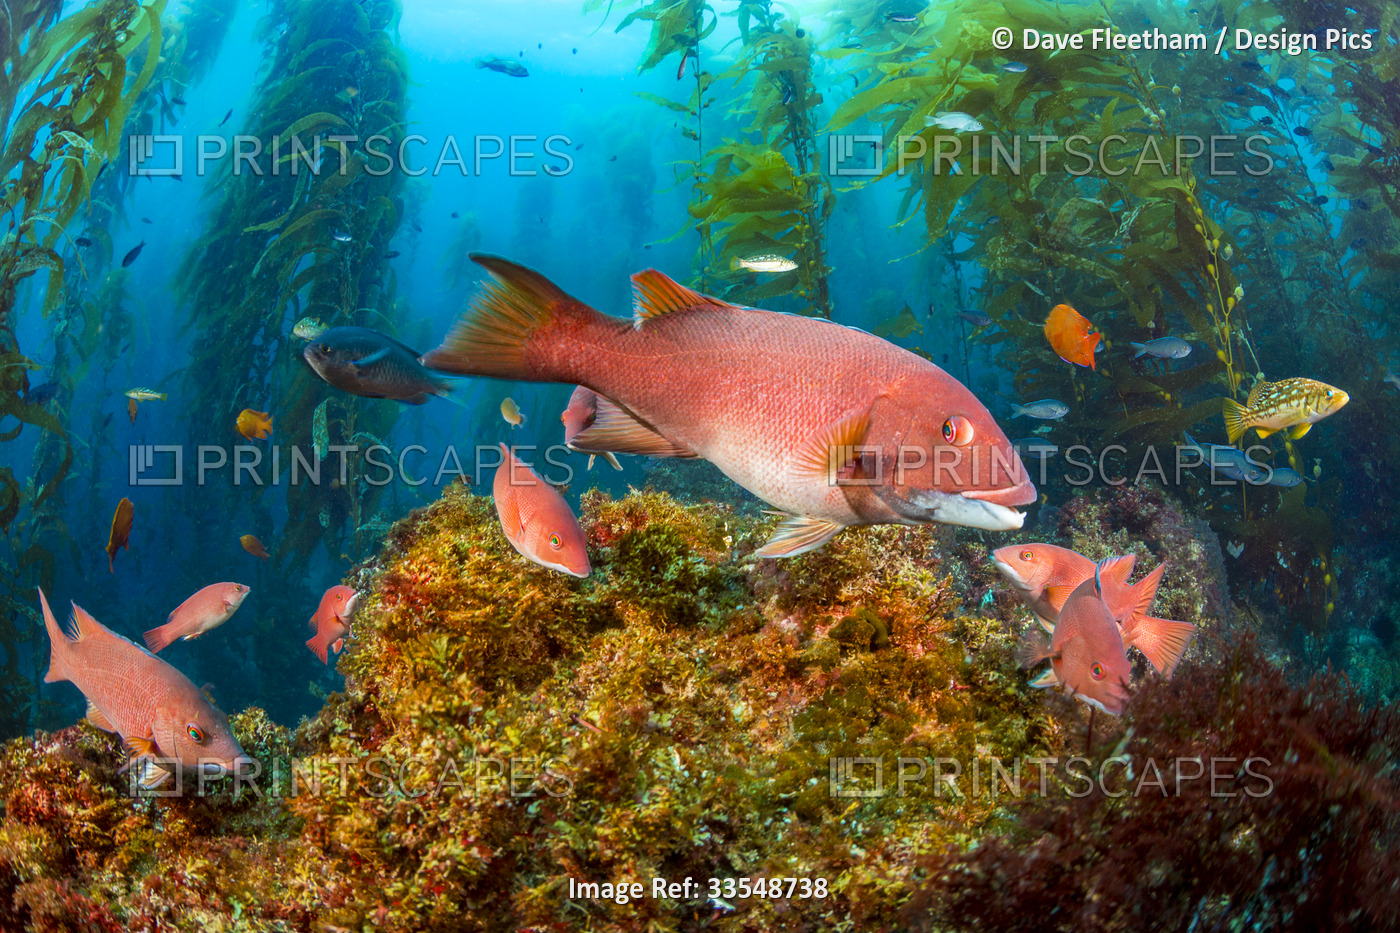 A female sheephead (Semicossyphus pulcher) and miscellaneous reef fish, are ...